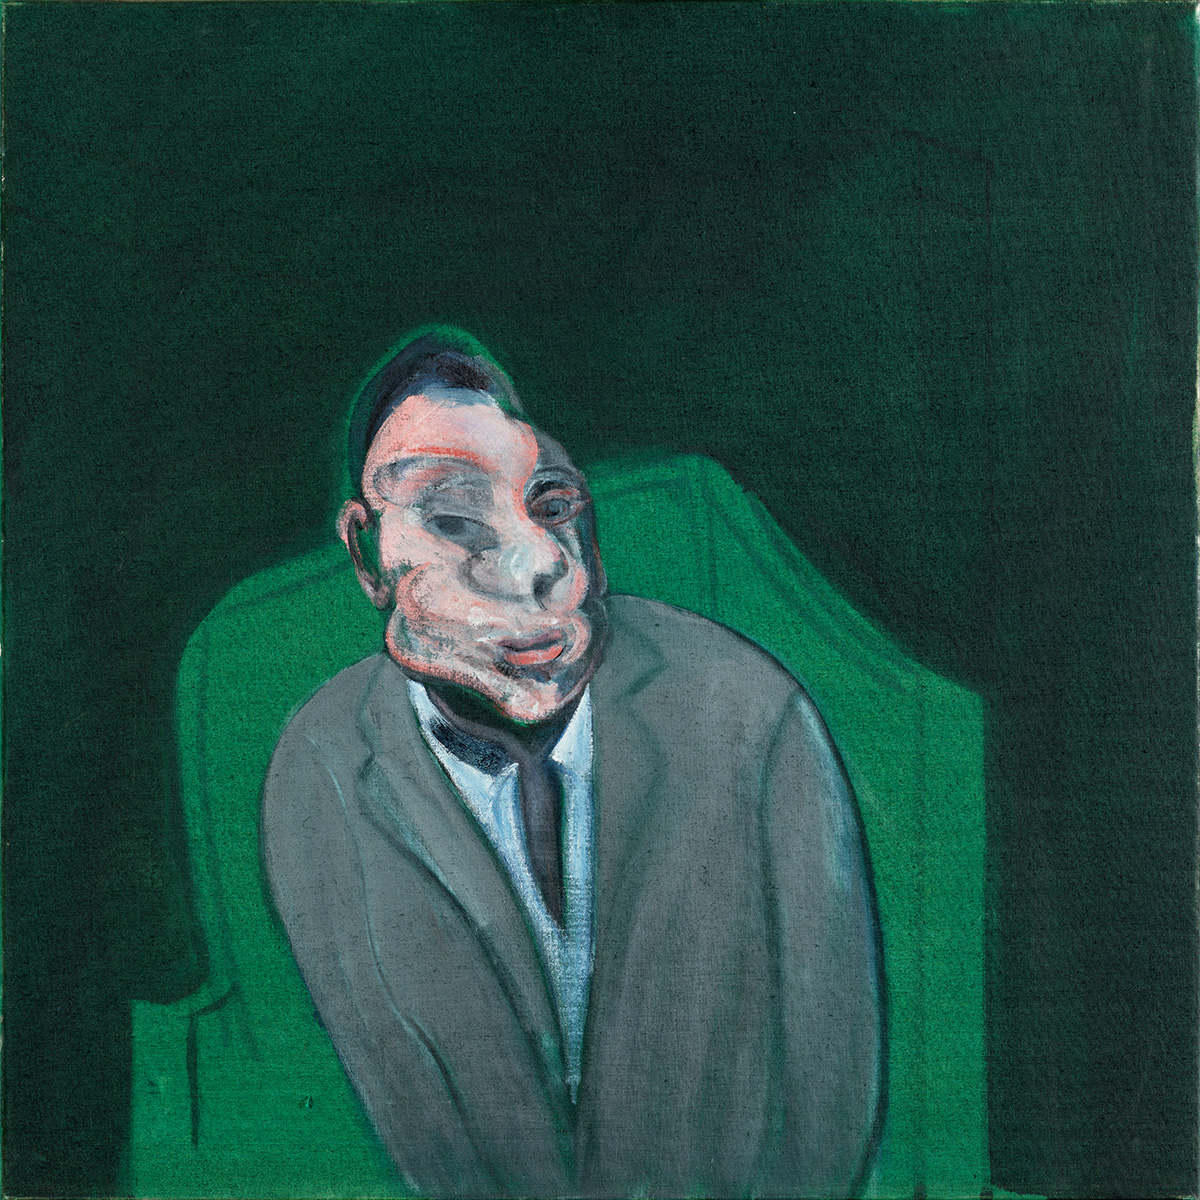 Head of a Man, 1960. Oil on canvas. CR no. 60-12. © The Estate of Francis Bacon / DACS London 2022. All rights reserved.